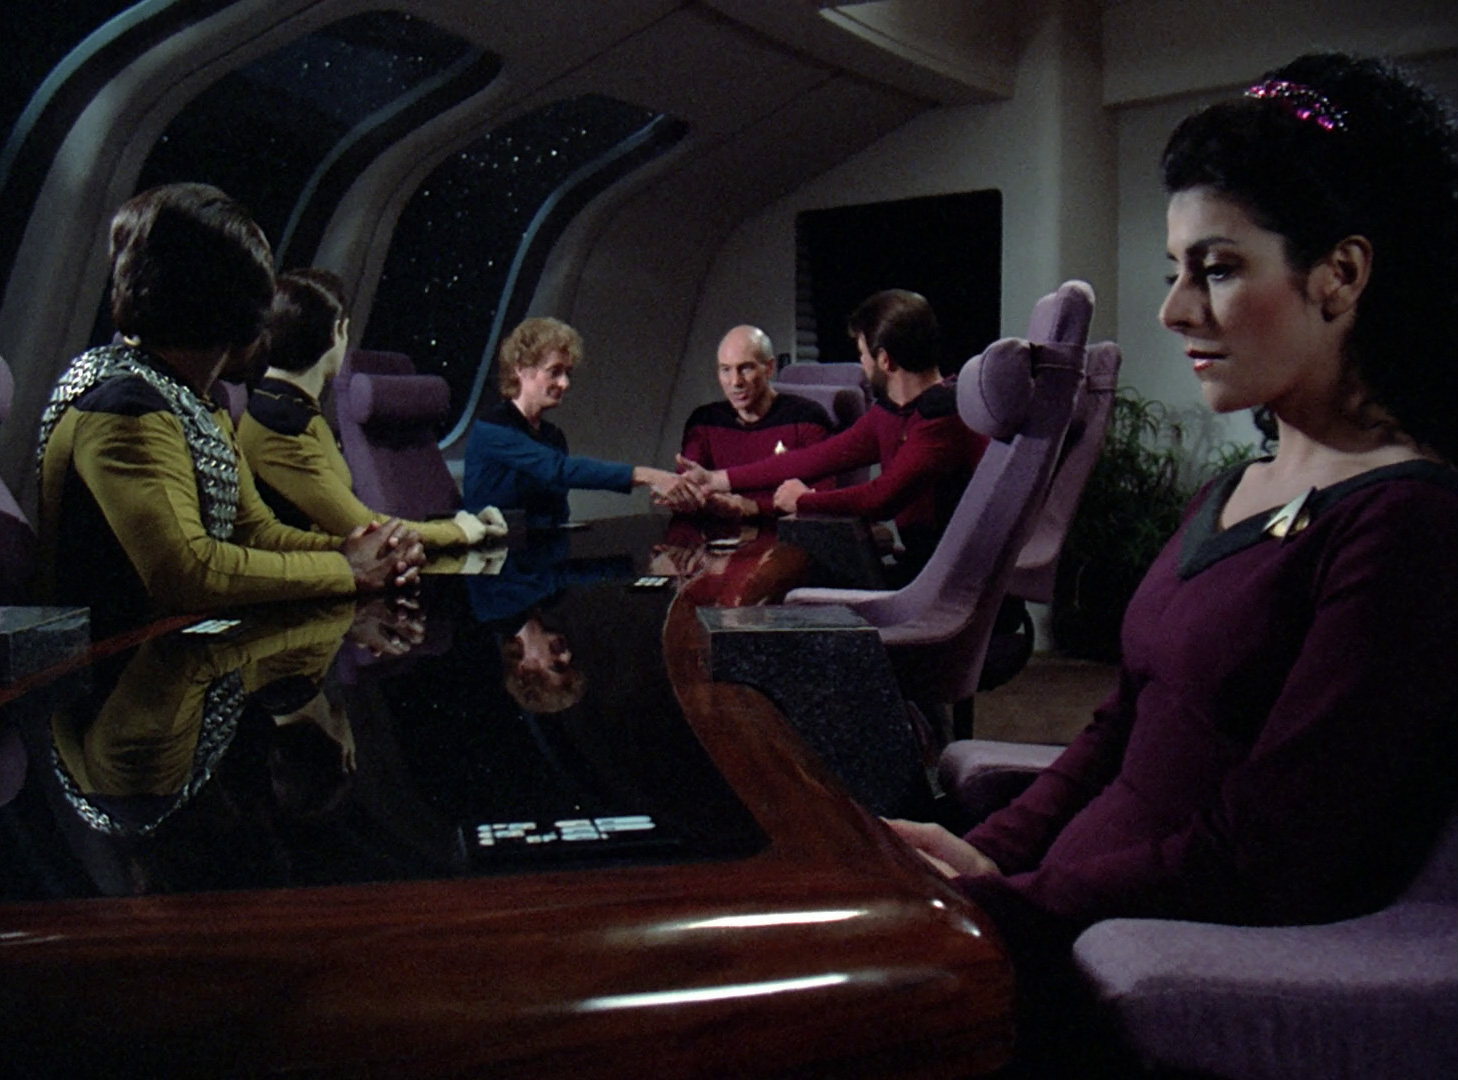 Troi sits by herself at the end of the table while the others discuss her pregnancy